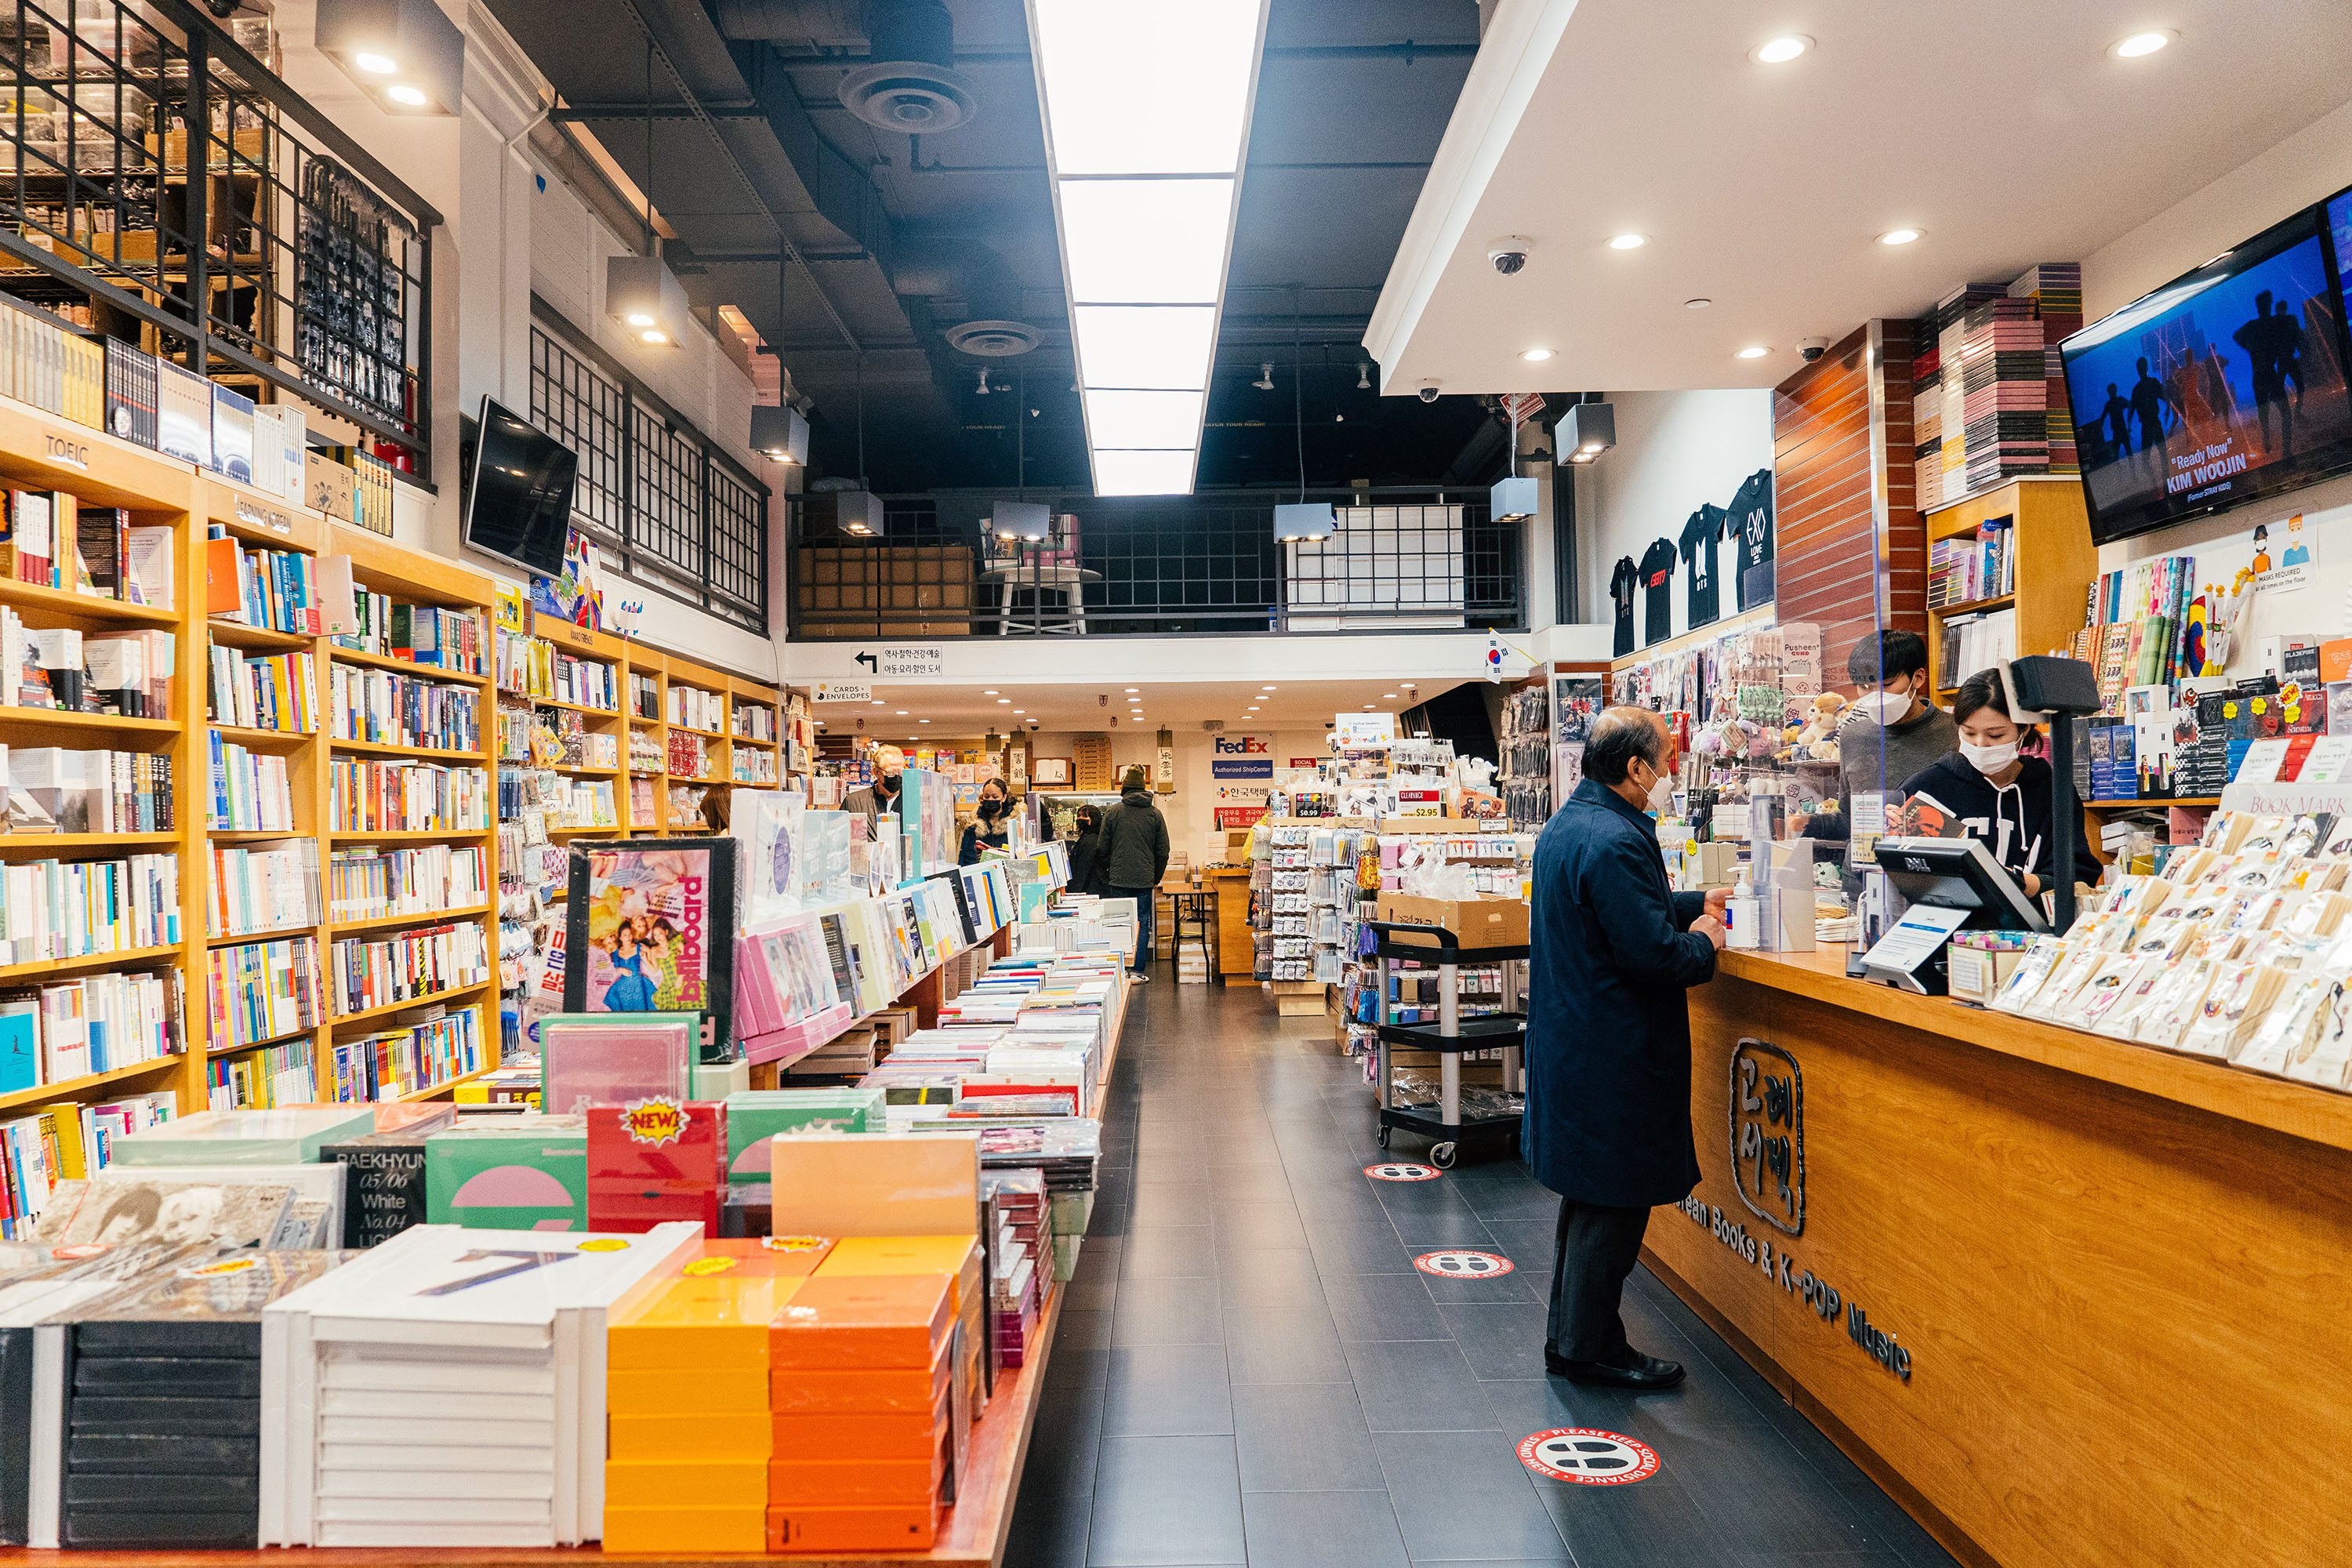 Korean Stationery Brands You Need to Know